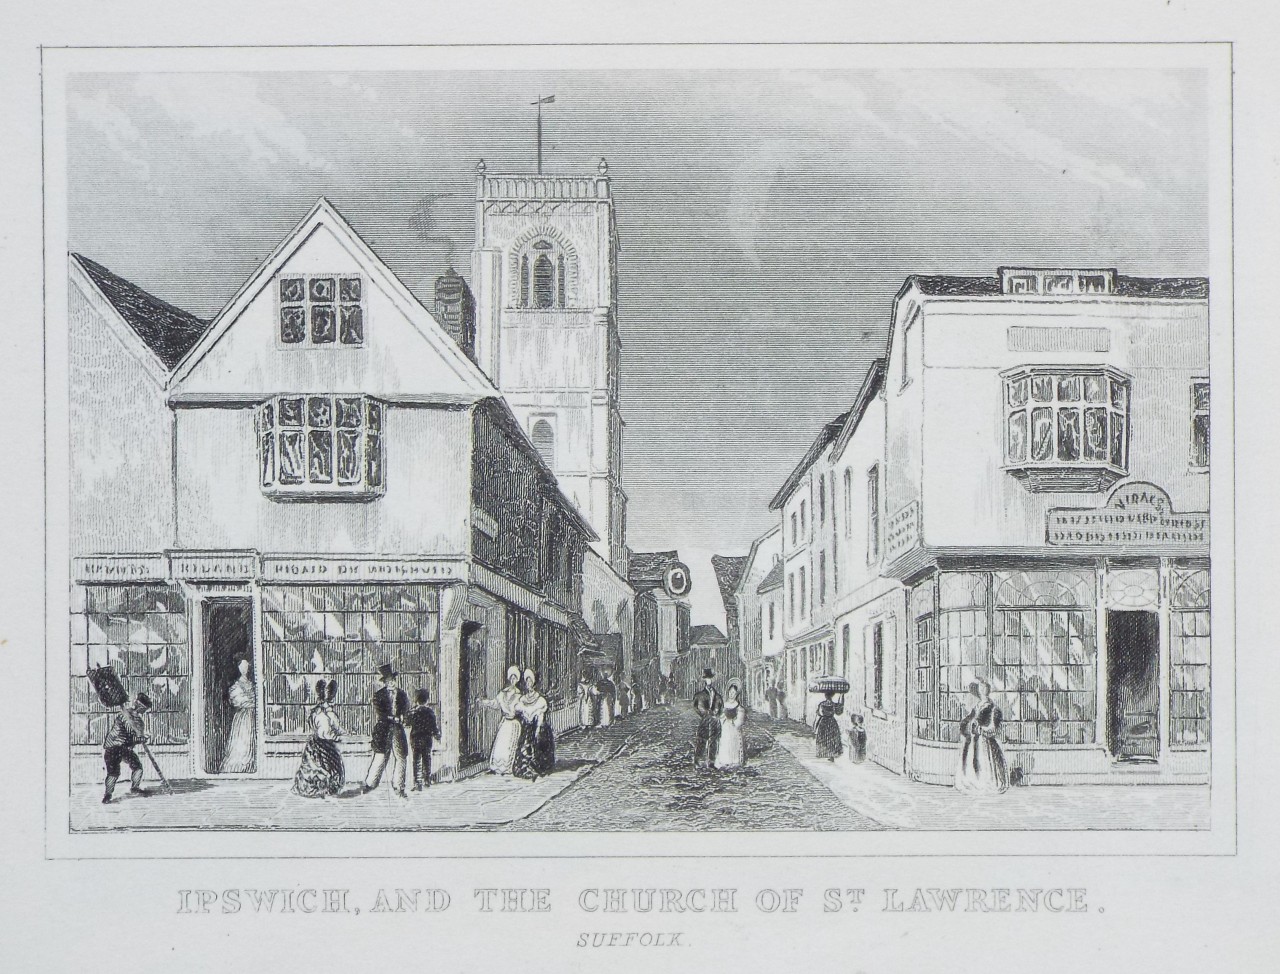 Print - Ipswich, and the Church of St. Lawrence. Suffolk.